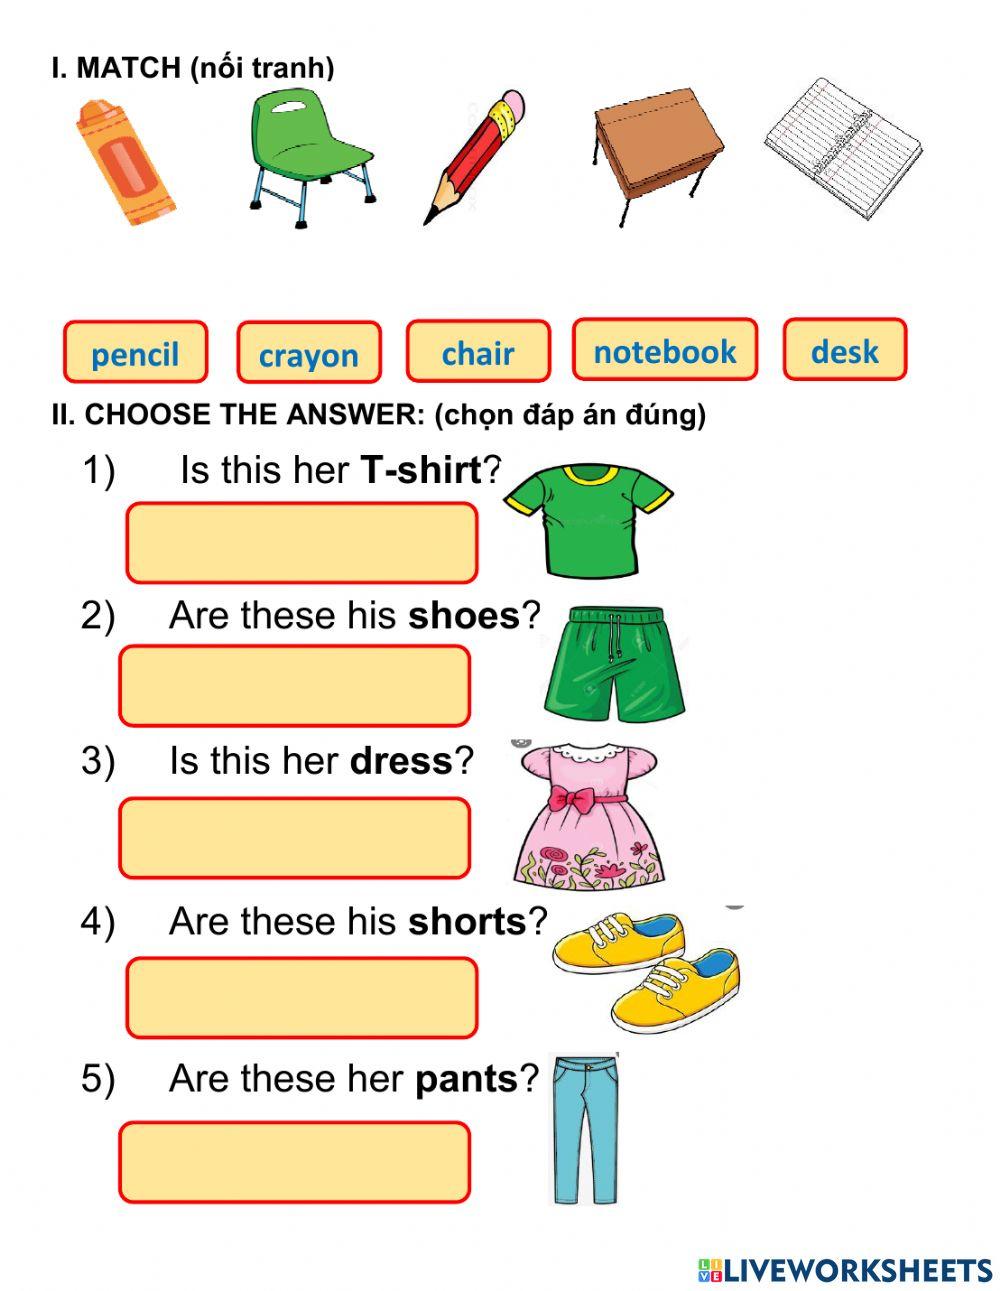 Grade 2 - are these his pants?